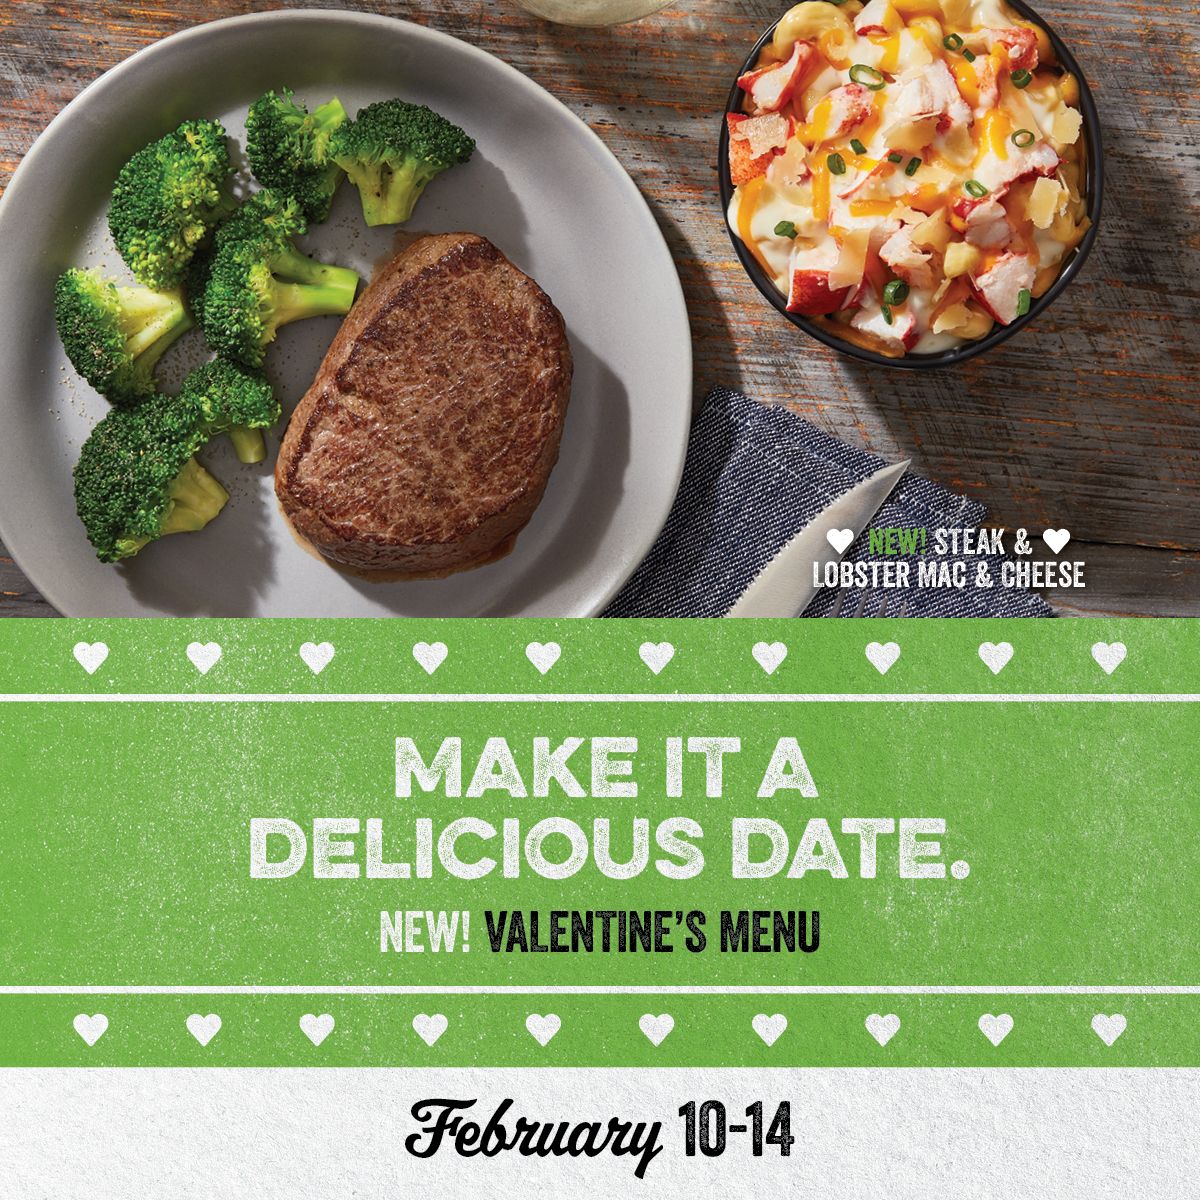 O'Charley's Celebrating Valentine's Day and Super Bowl with Delicious Meals and Deals